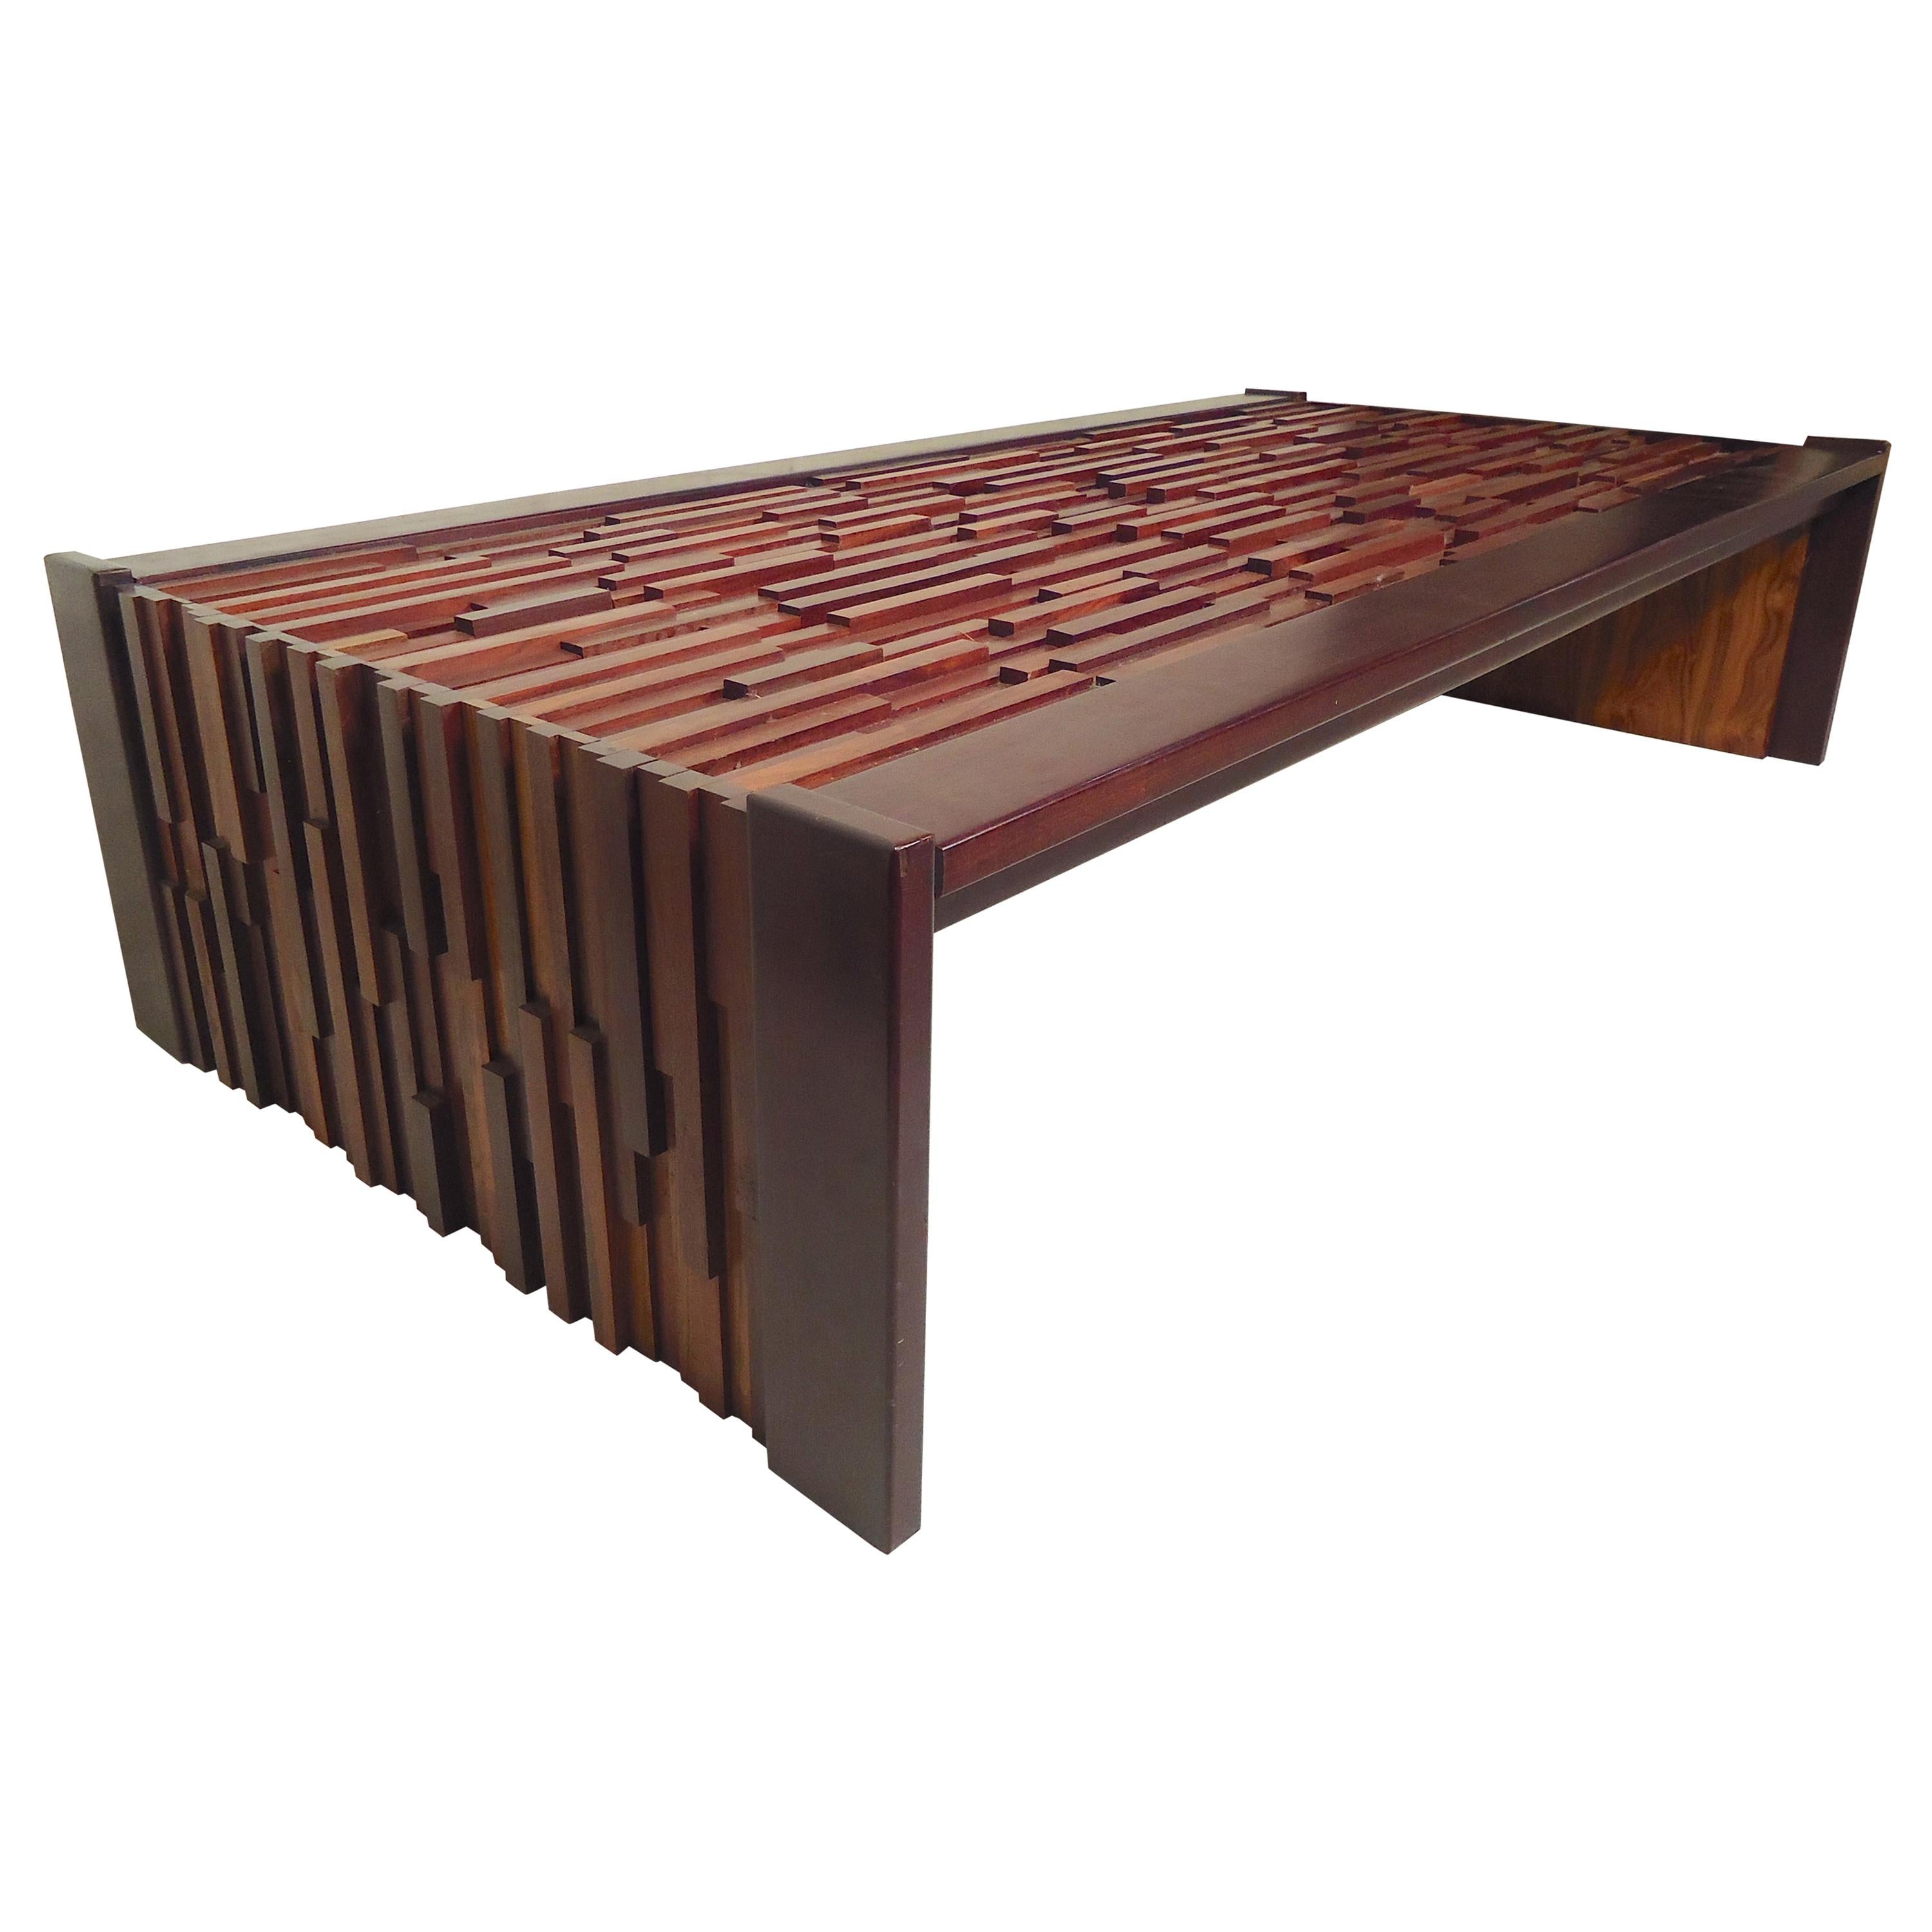 Percival Lafer Mosaic Coffee Table